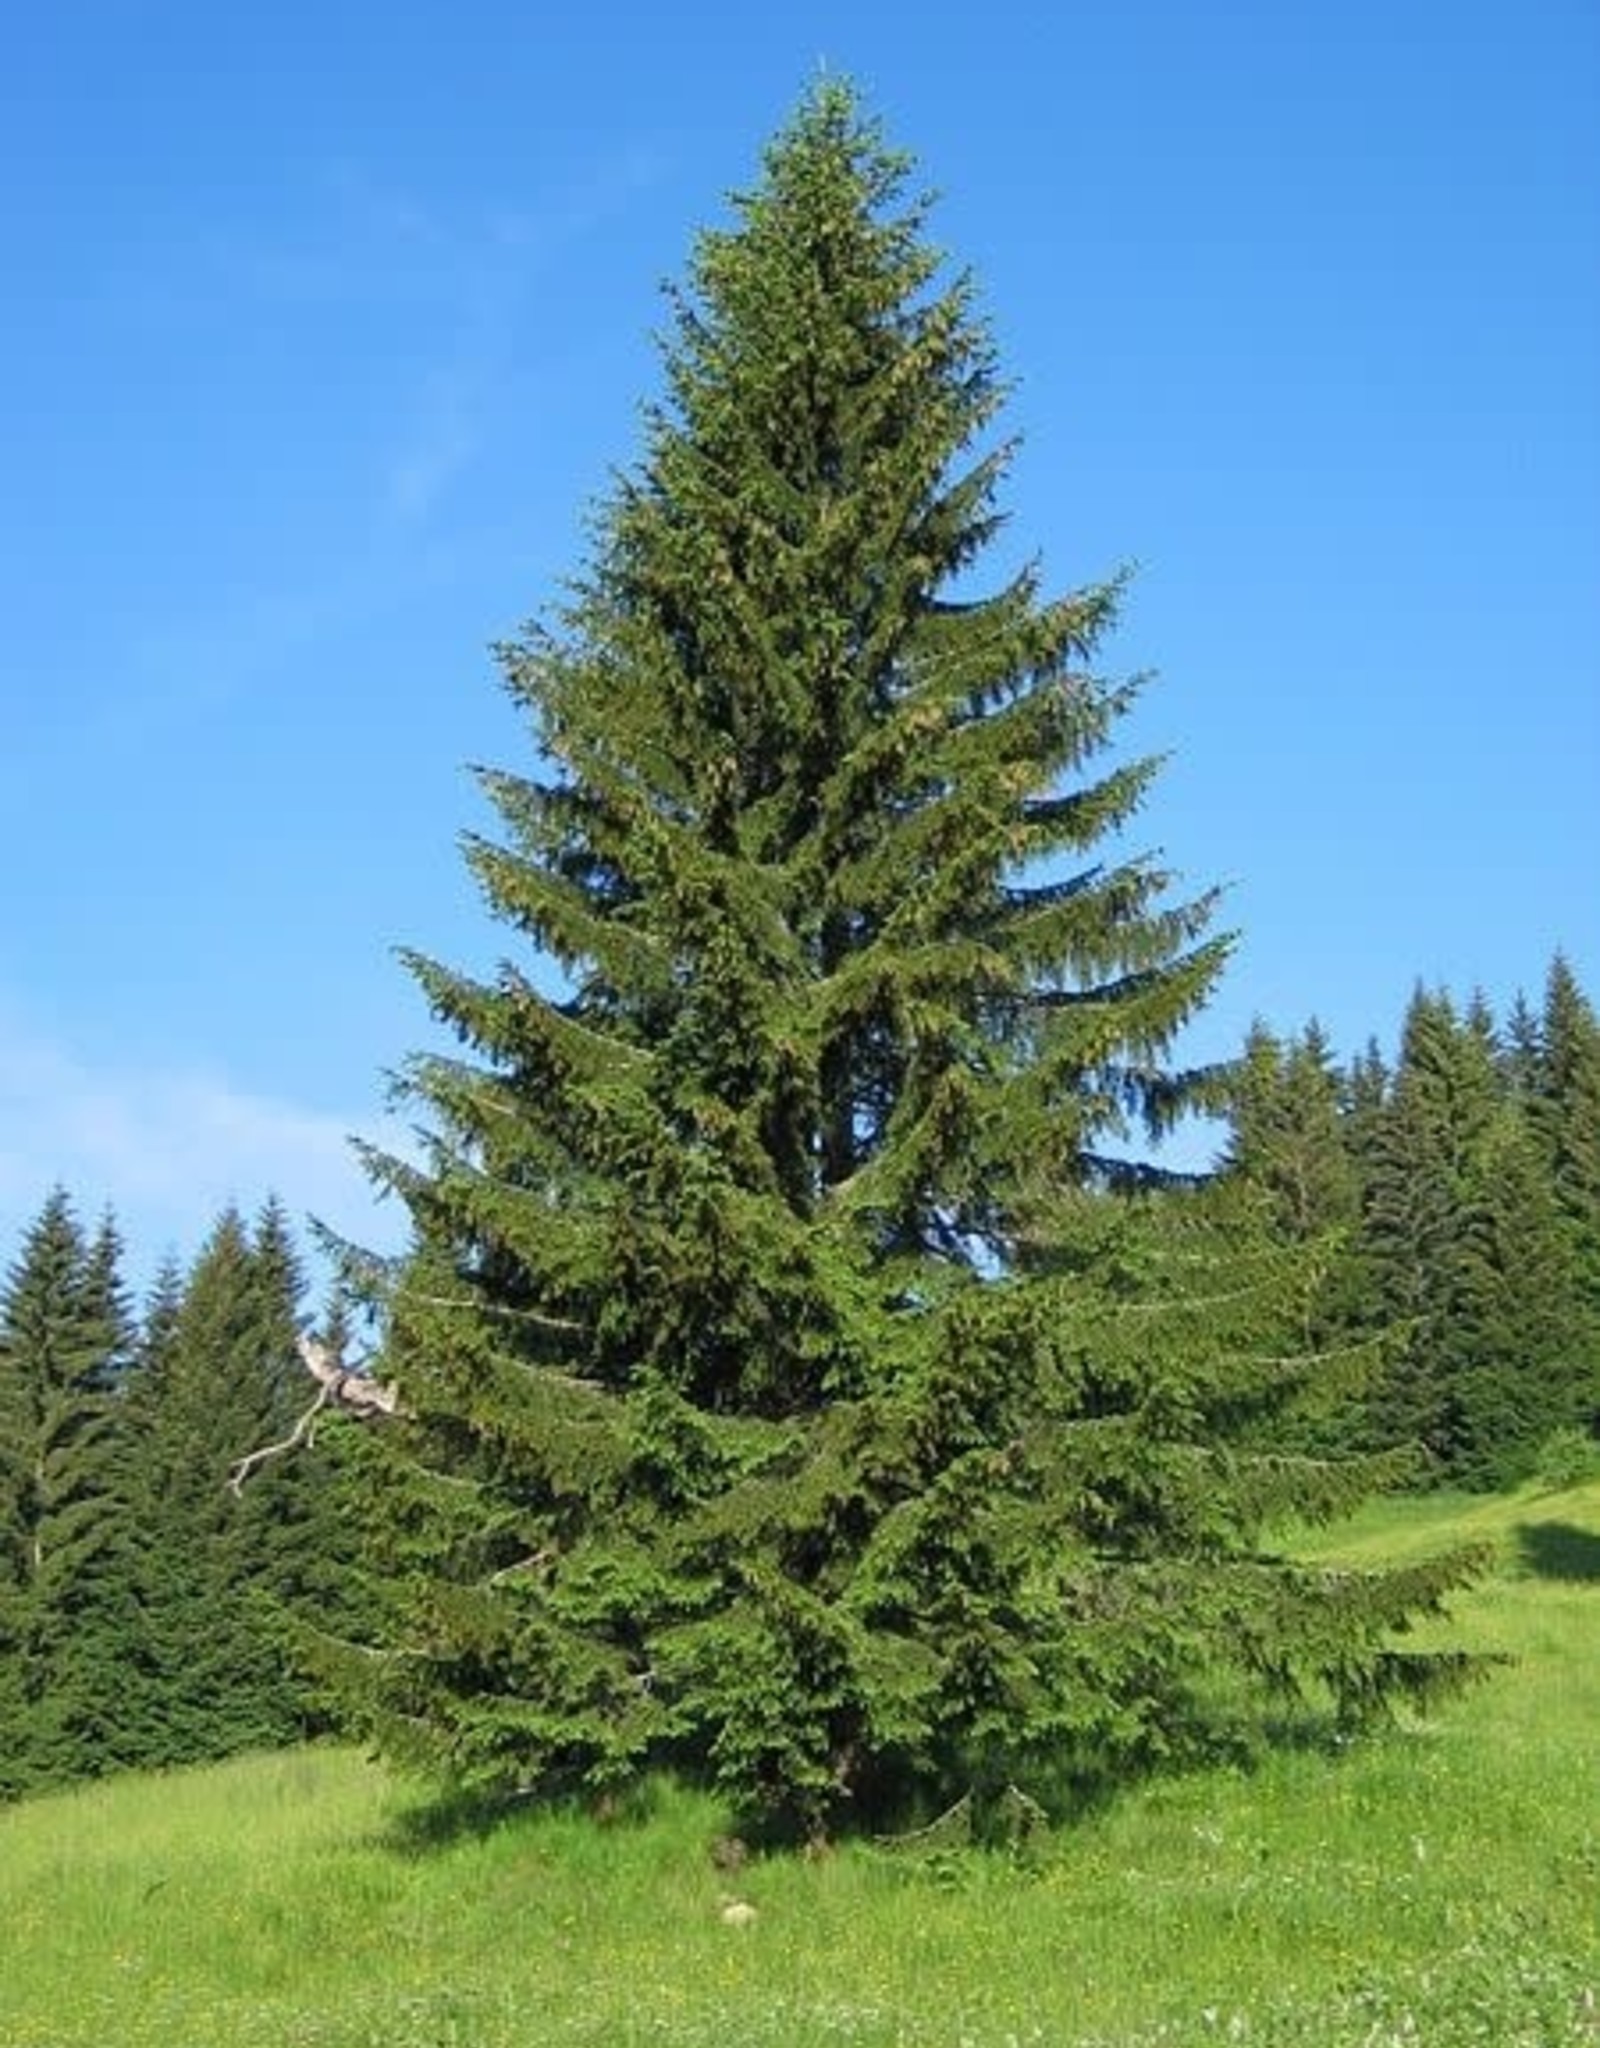 Sester Farms Picea abies -Norway Spruce #5 super 24-30inch"